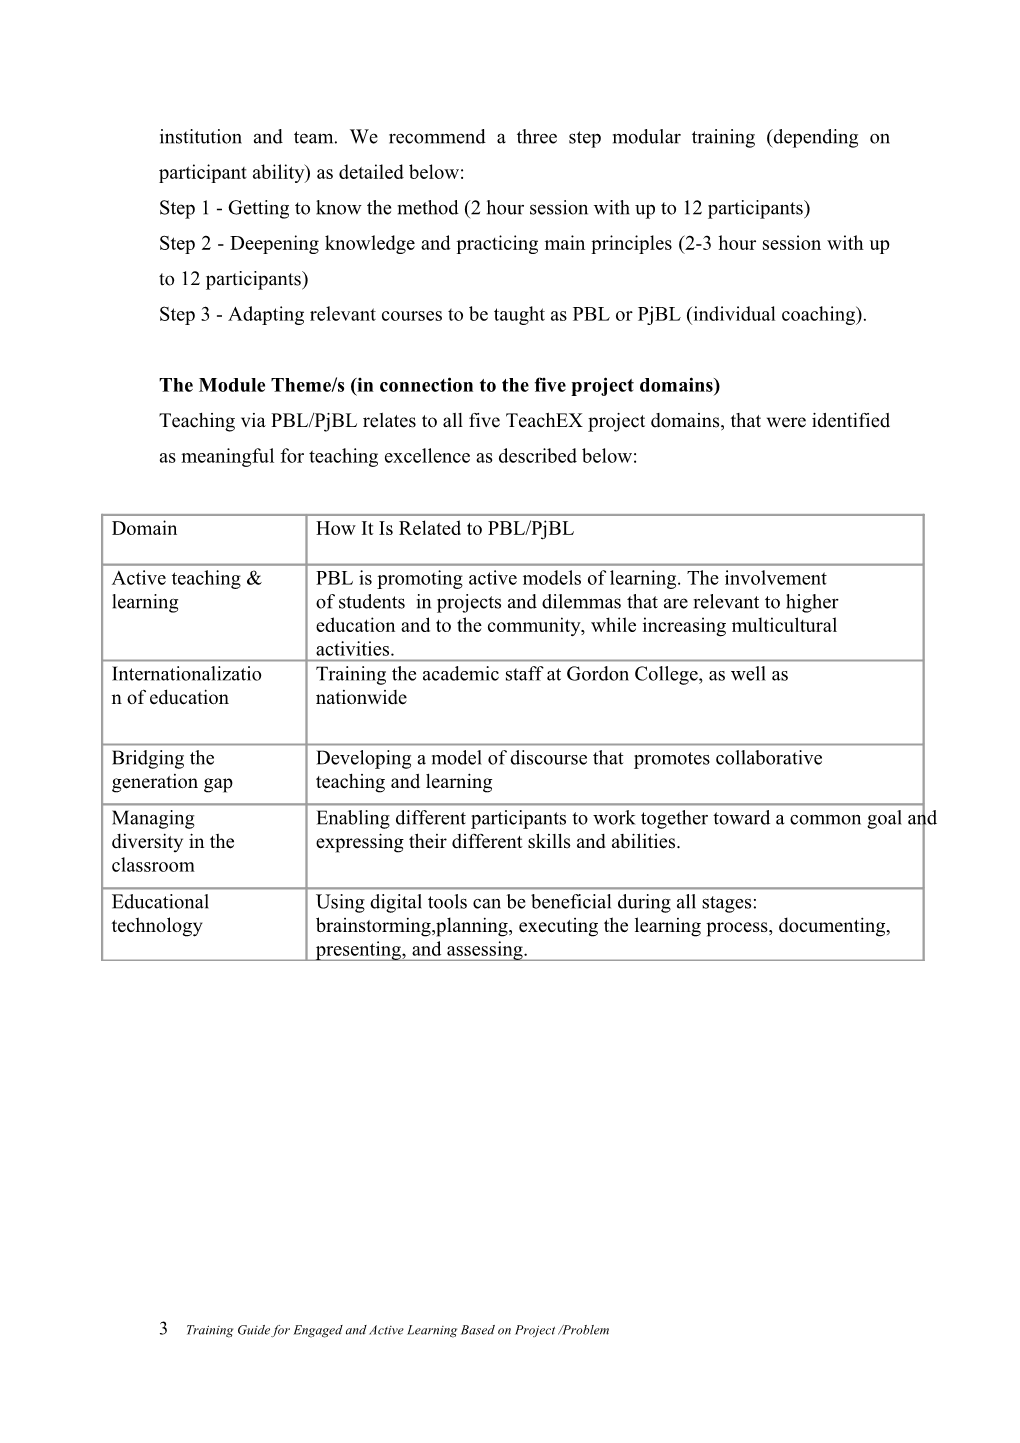 Training Guide for Engaged and Active Learning Based on a Problem/Project